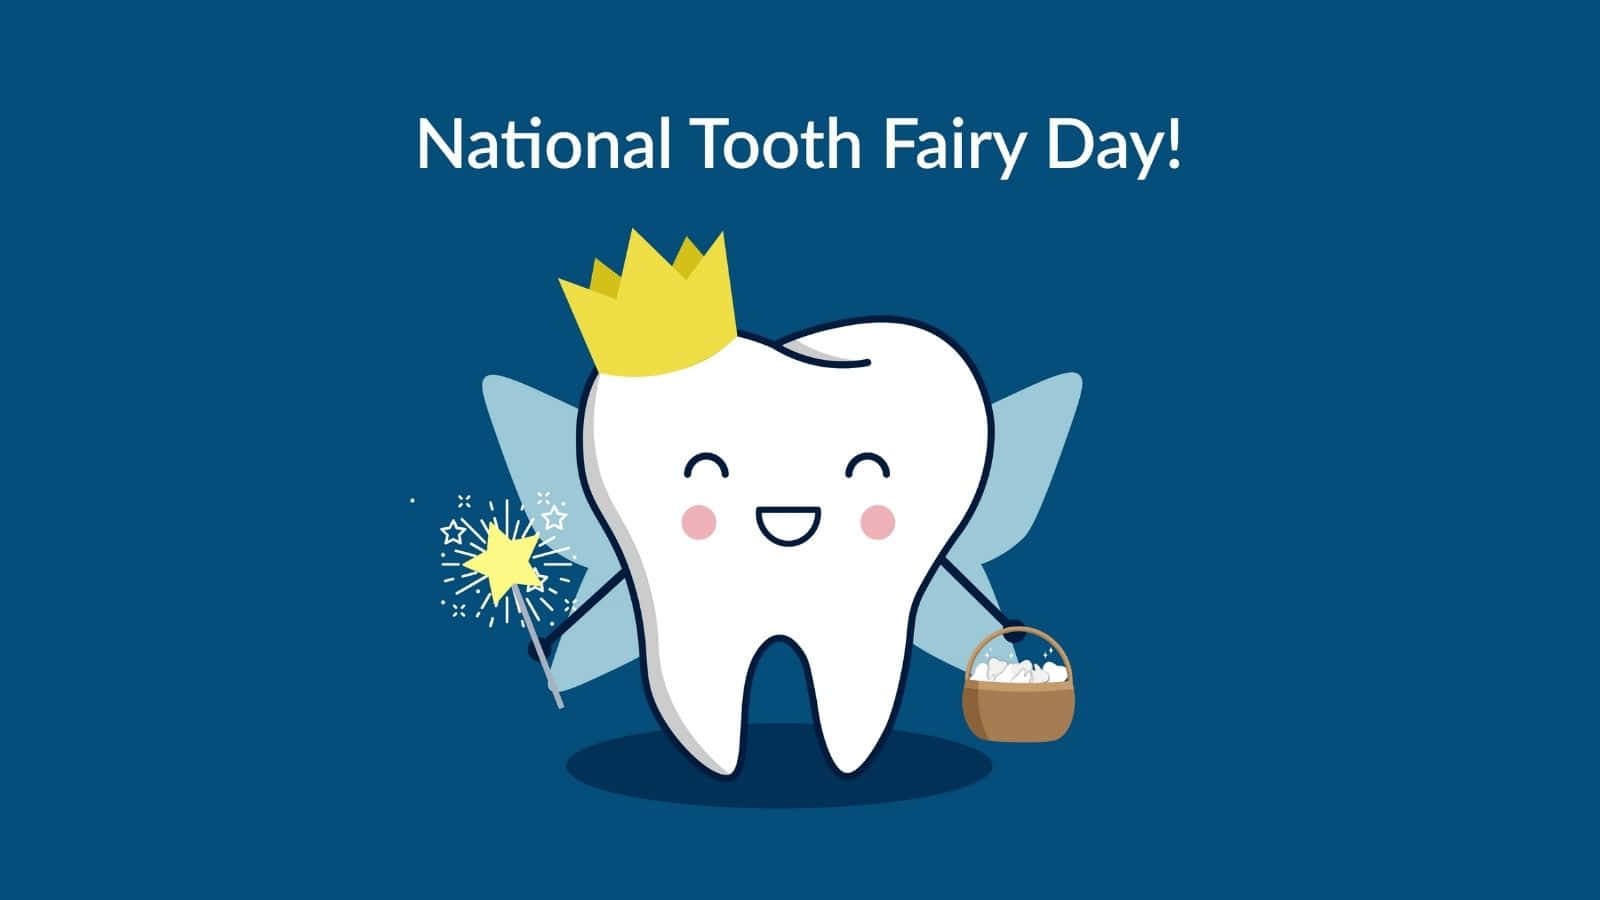 Make your wishes come true with the Tooth Fairy!